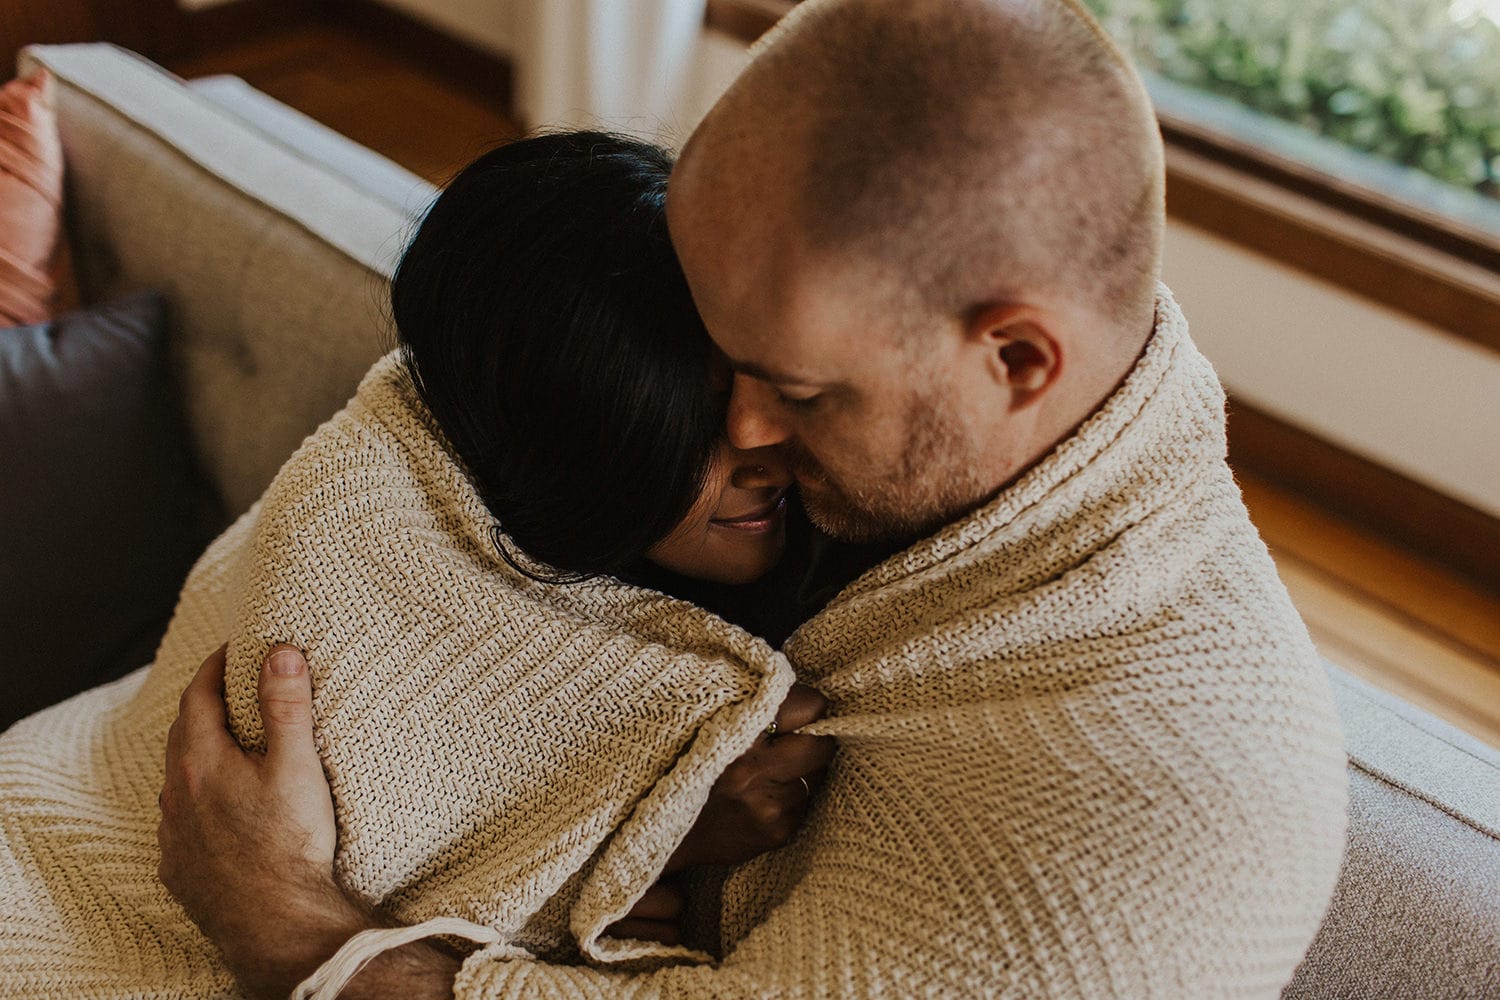 portland couple snuggling in a blanket on the couch - anniversary date night ideas